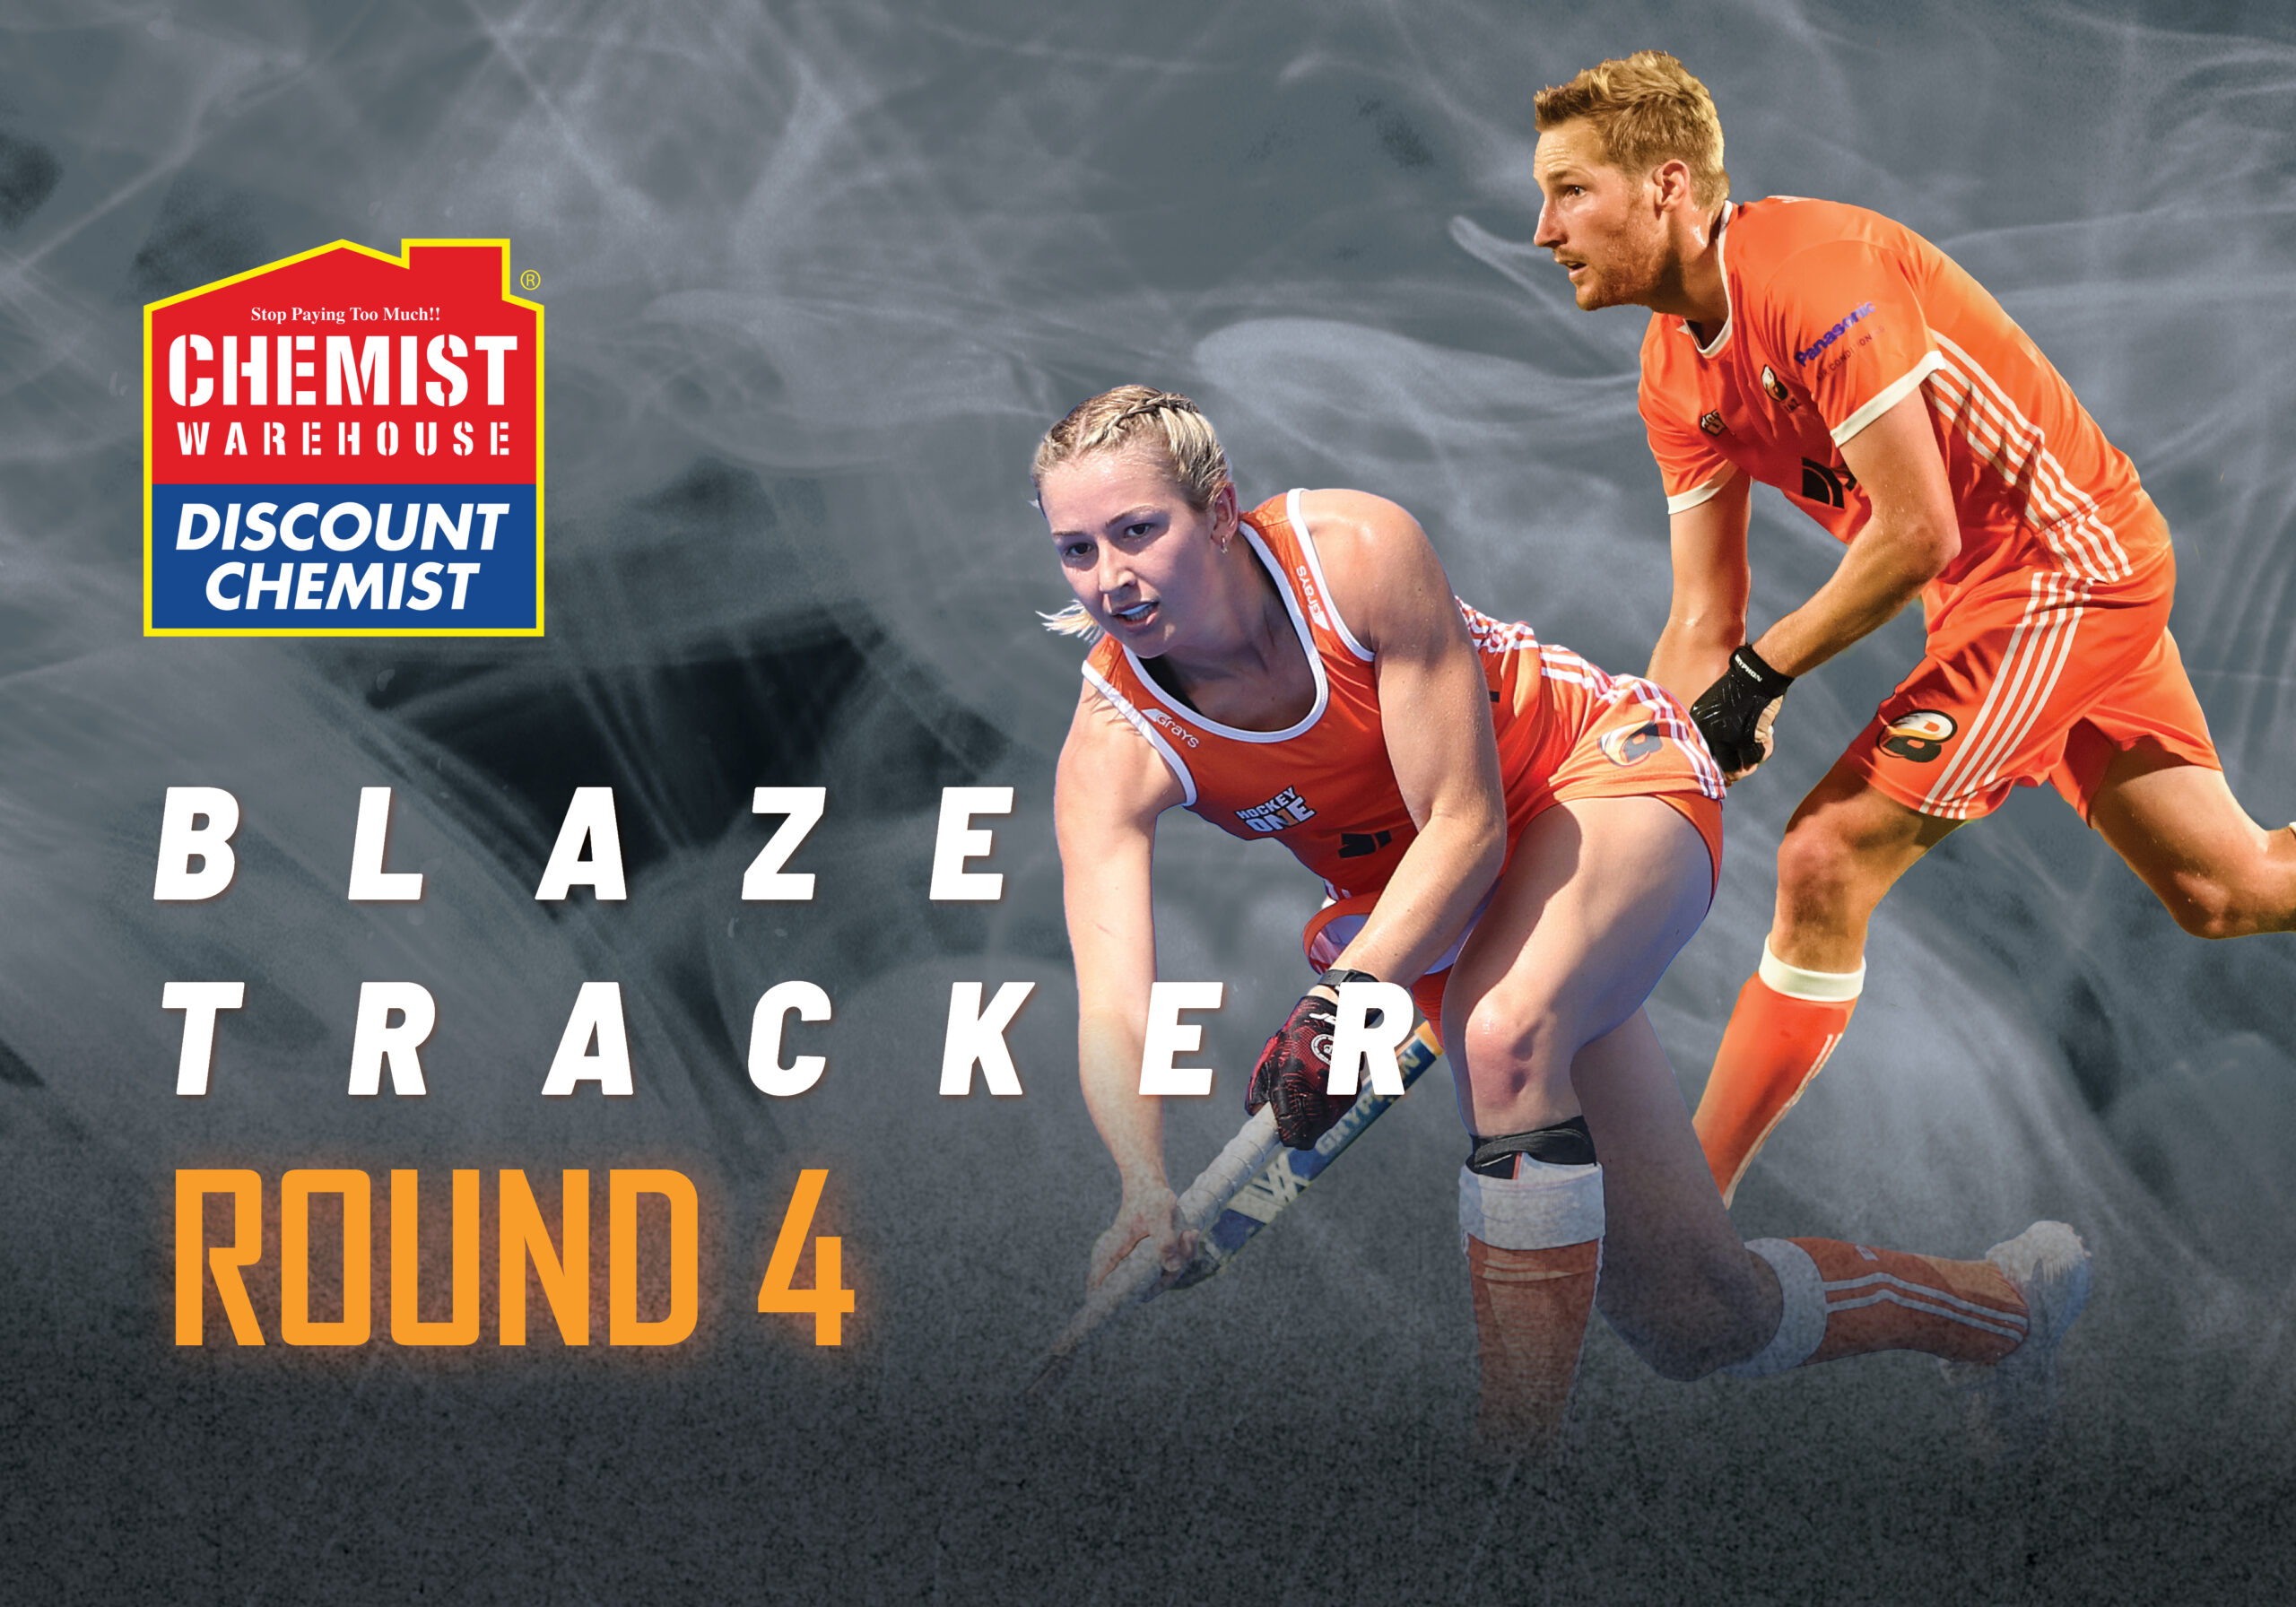 HQ034 Blaze 2023 H1 Website Banner 1000x700 Round 4 Tracker scaled - HockeyOne: Real Deal Beale lights up the Chemist Warehouse Blaze Tracker in Round 4 - October 31, 2023